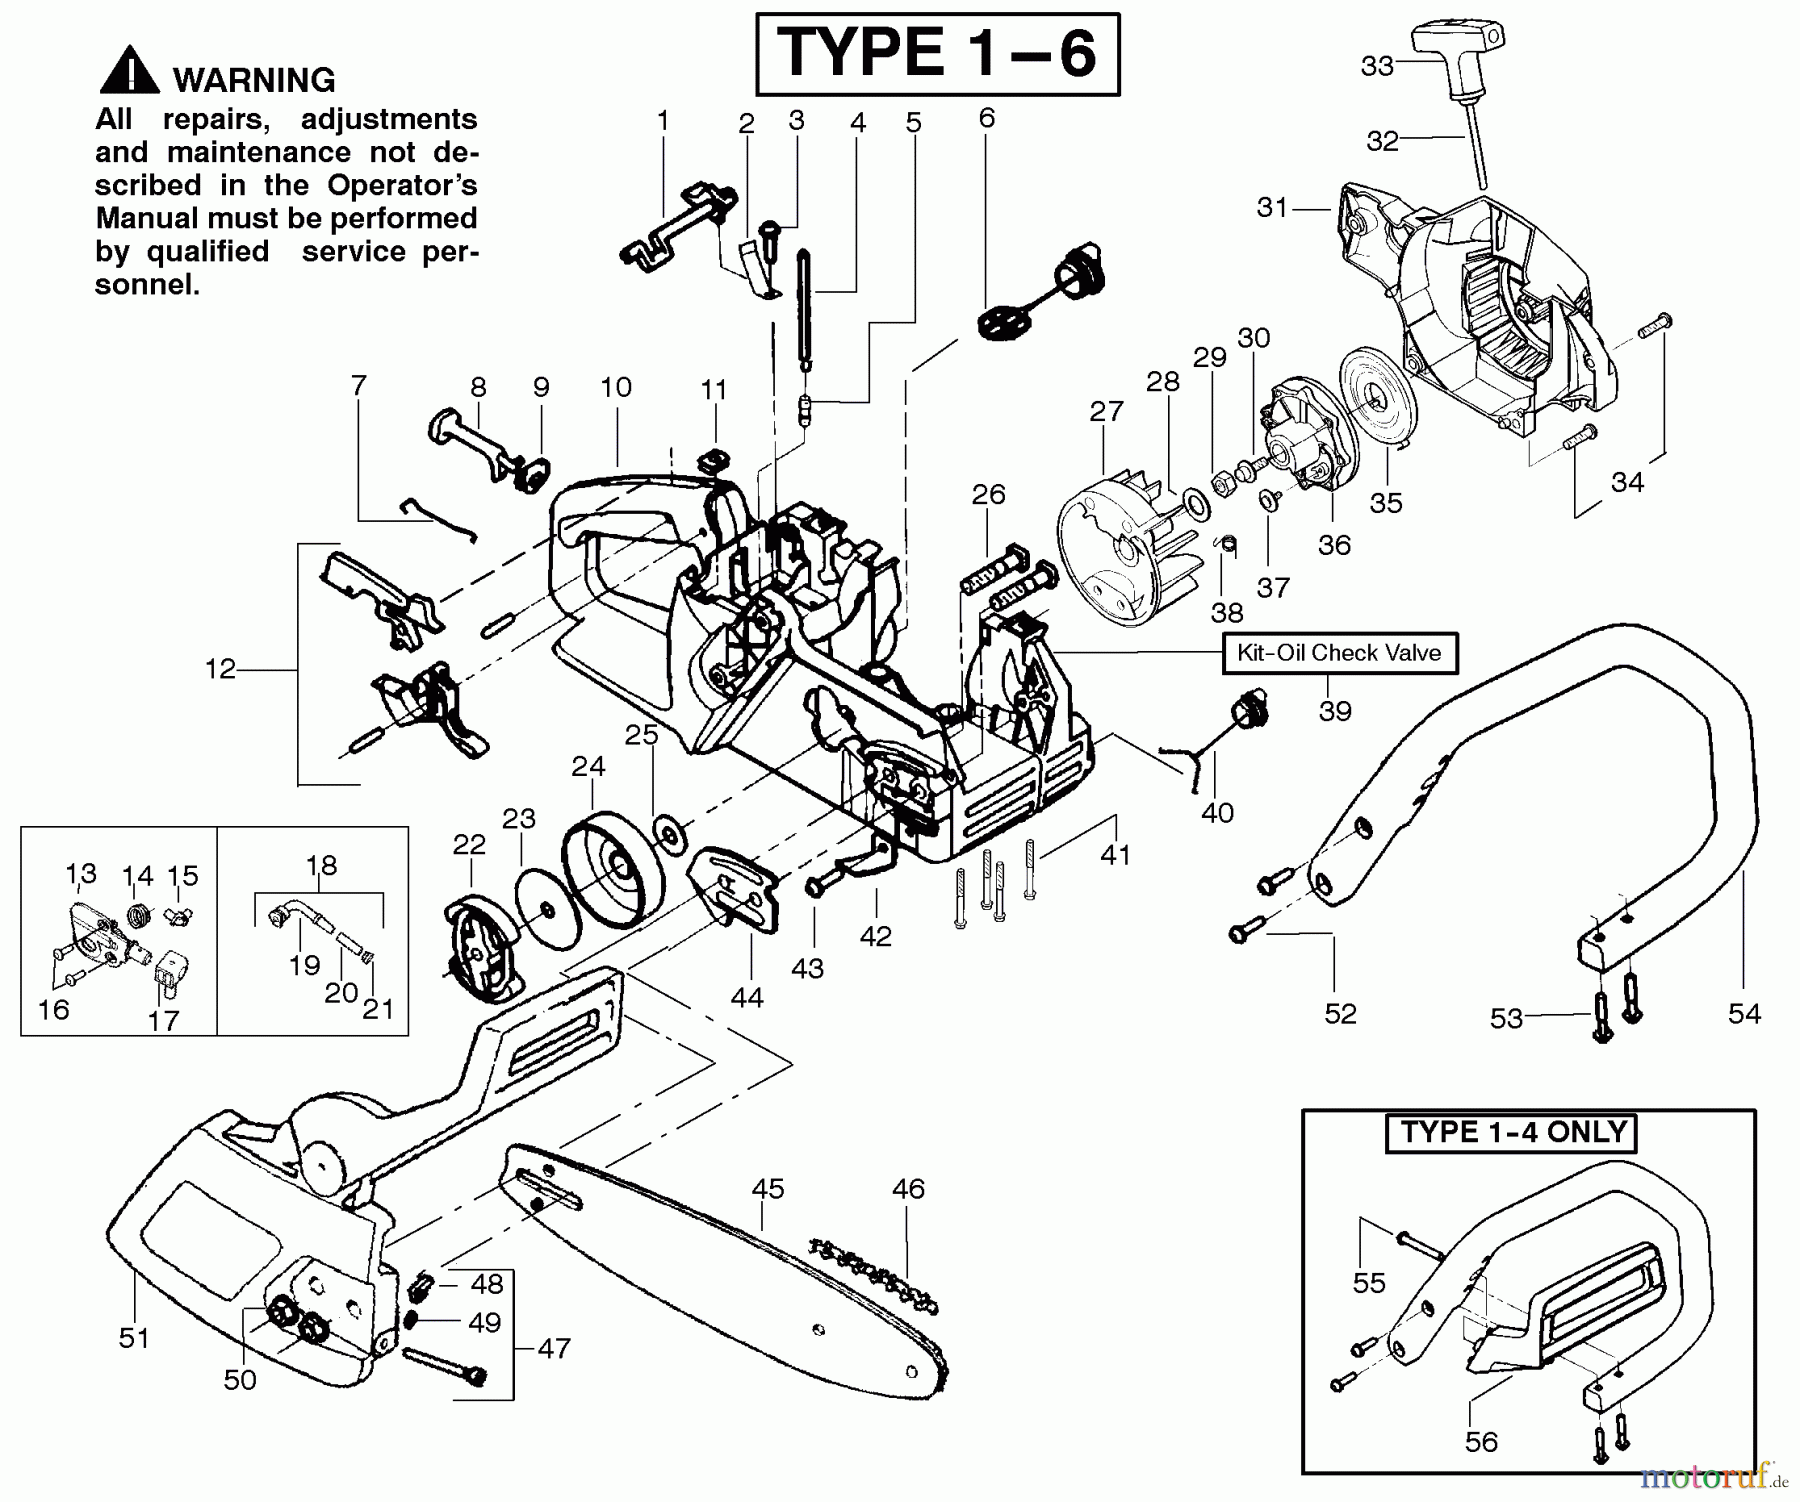  Poulan / Weed Eater Motorsägen 2375 (Type 4) - Poulan Wildthing Chainsaw Handle, Chassis & Bar Assembly Type 1-6